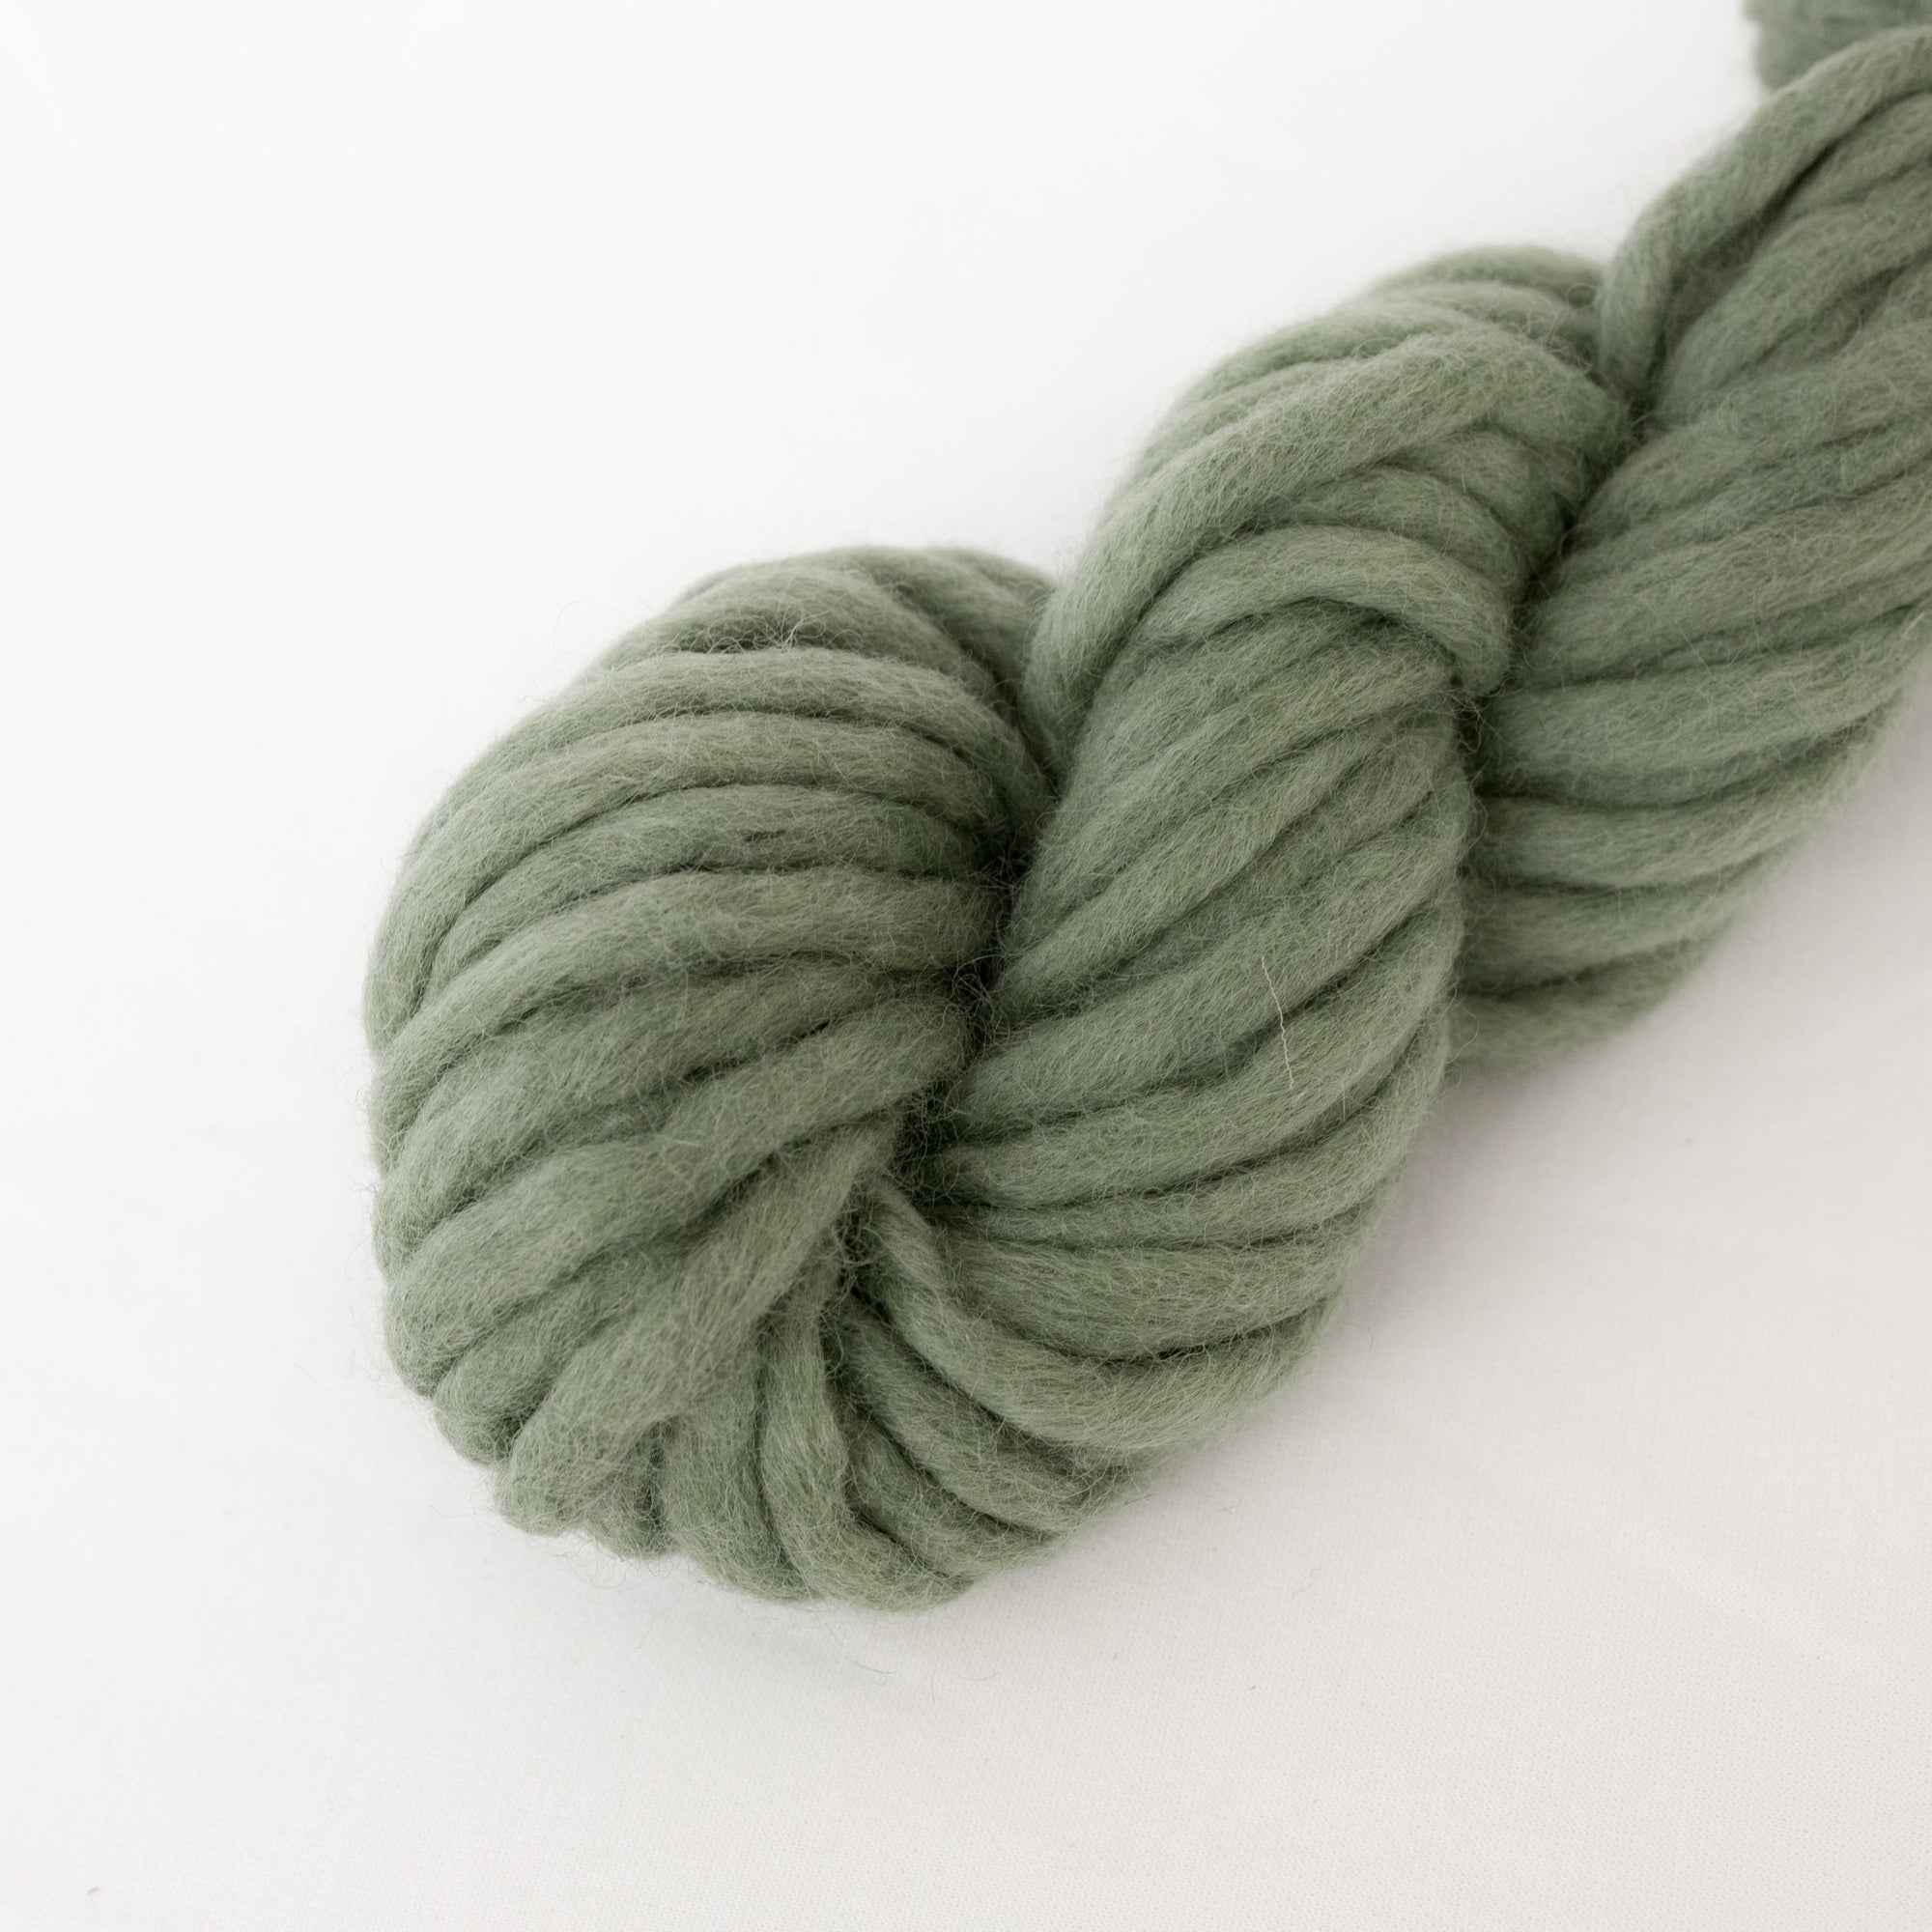 Mary Maker Studio speciality fibre Jungle Green Felted Finger Rope macrame cotton macrame rope macrame workshop macrame patterns macrame